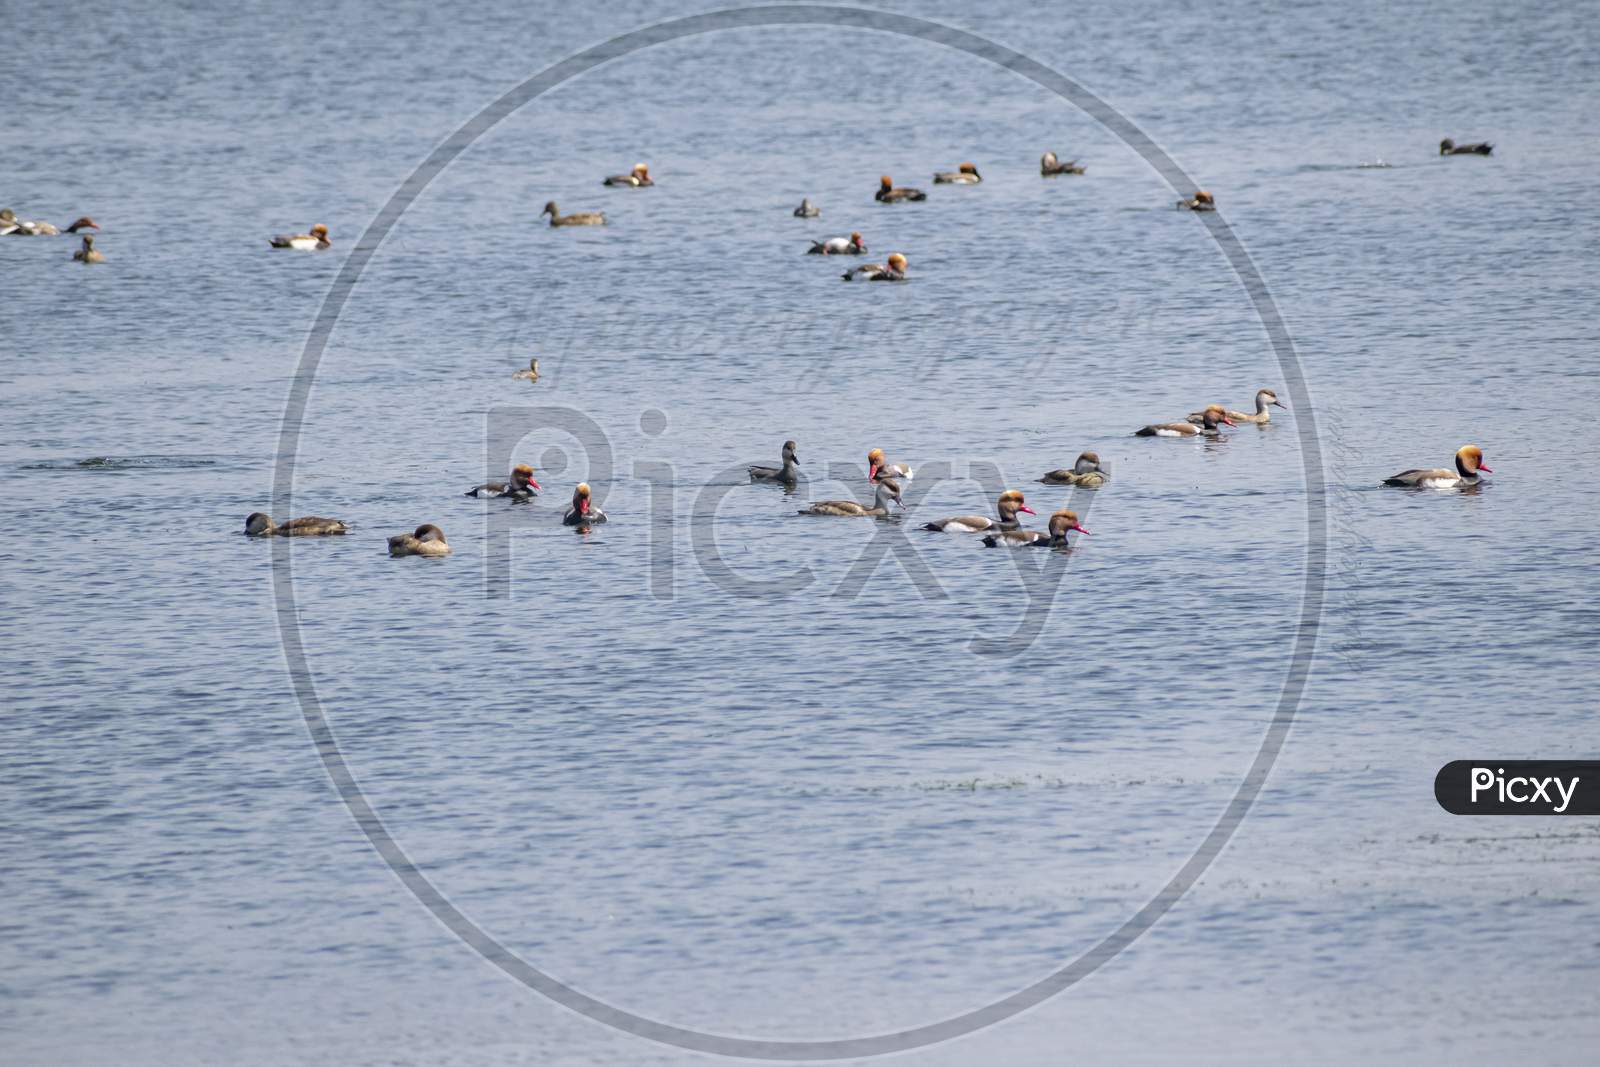 Migratory Birds Playing In The Cool Water Pond In Groups. Barabani , Asansol,India.